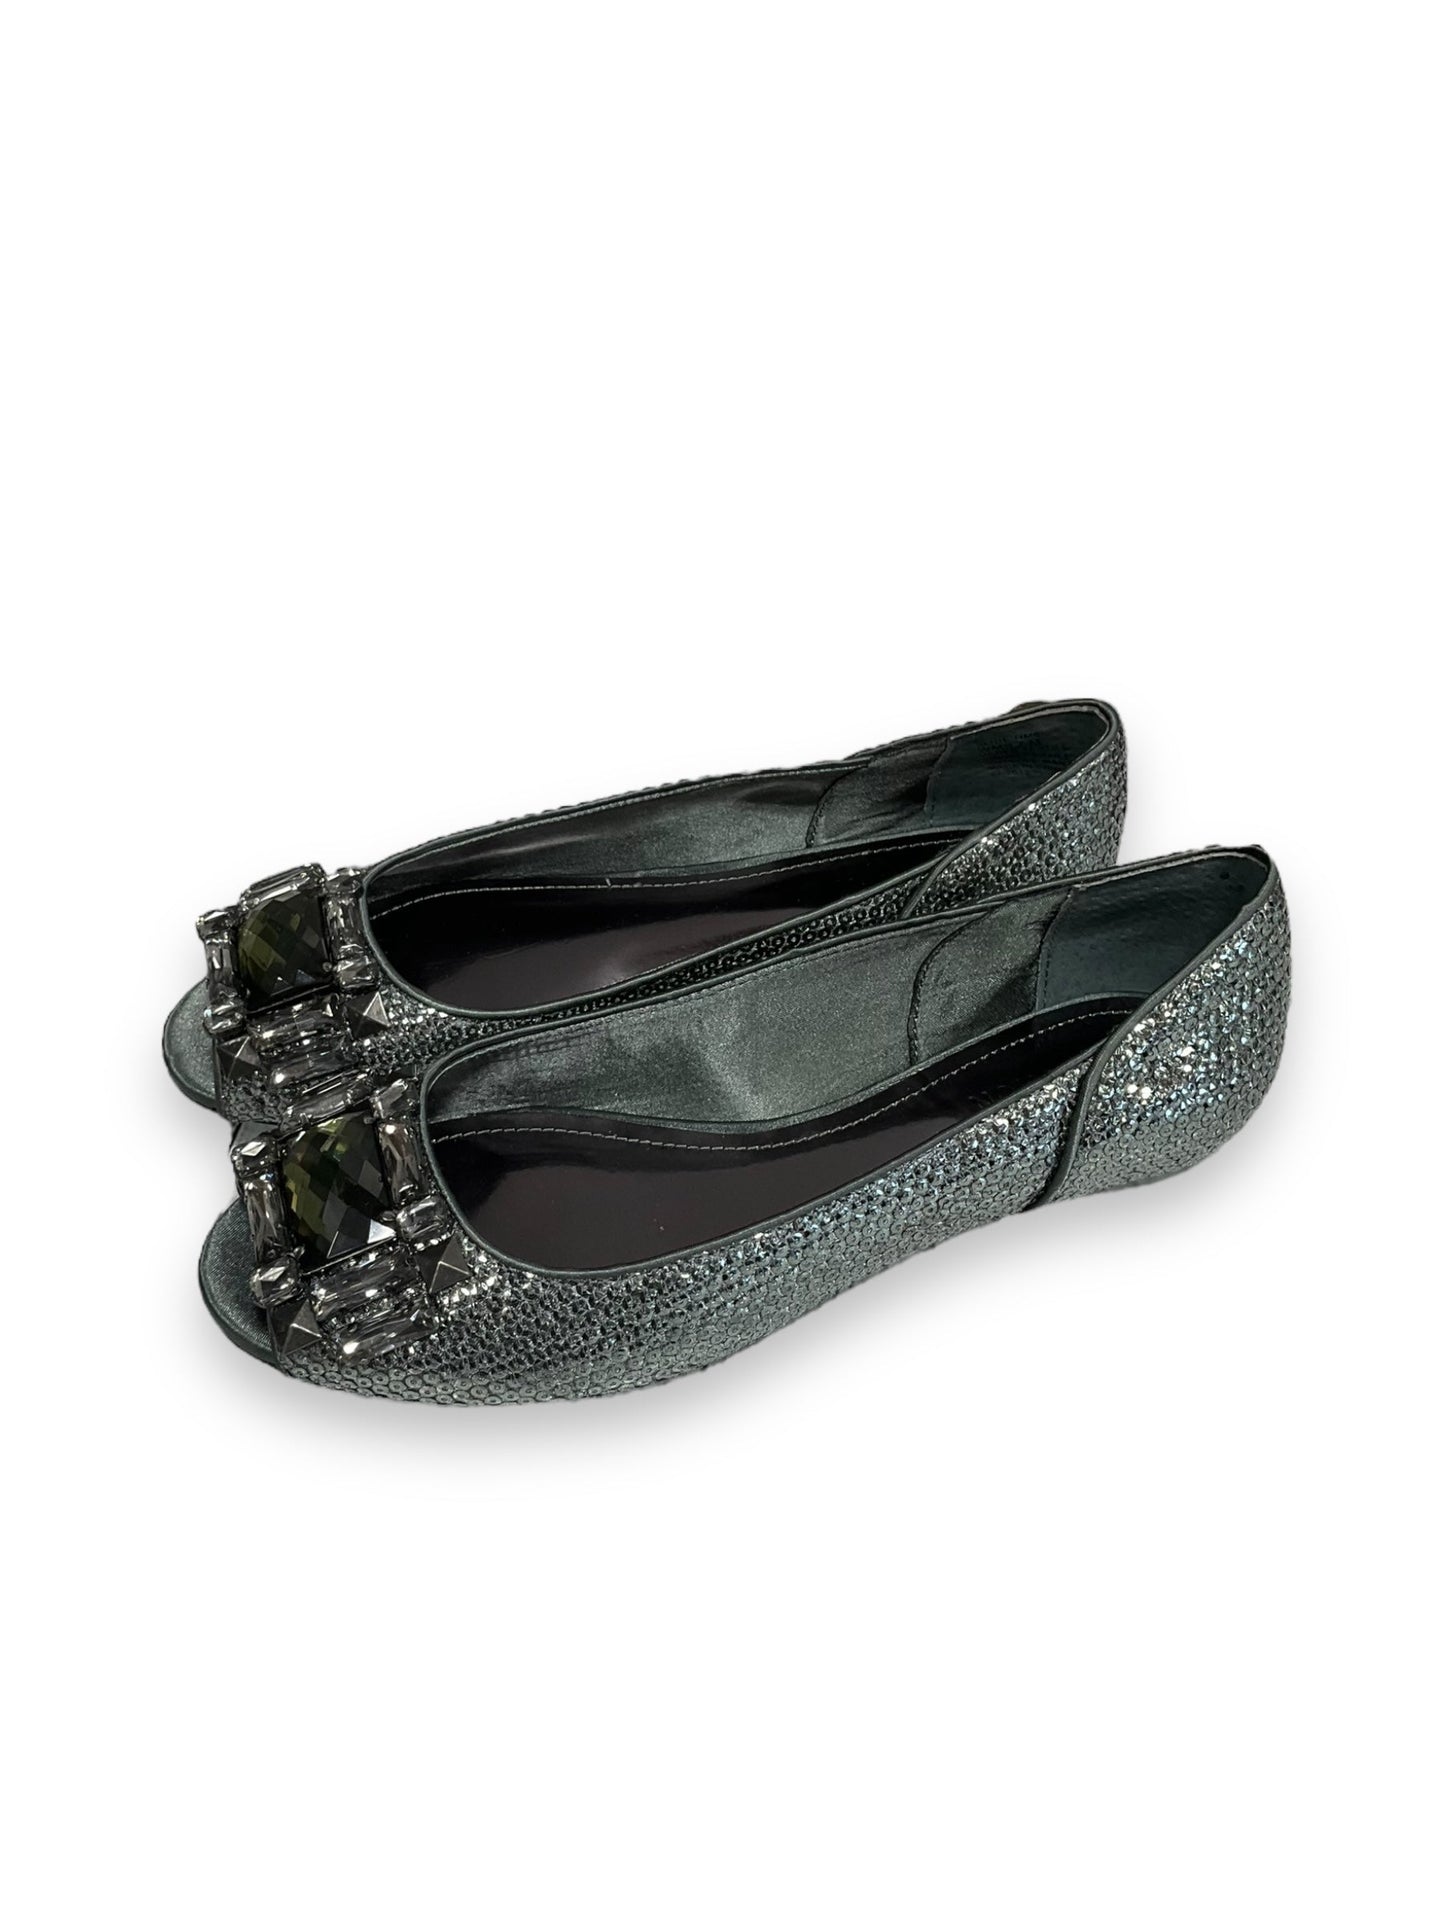 Shoes Flats By Kenneth Cole Reaction  Size: 7